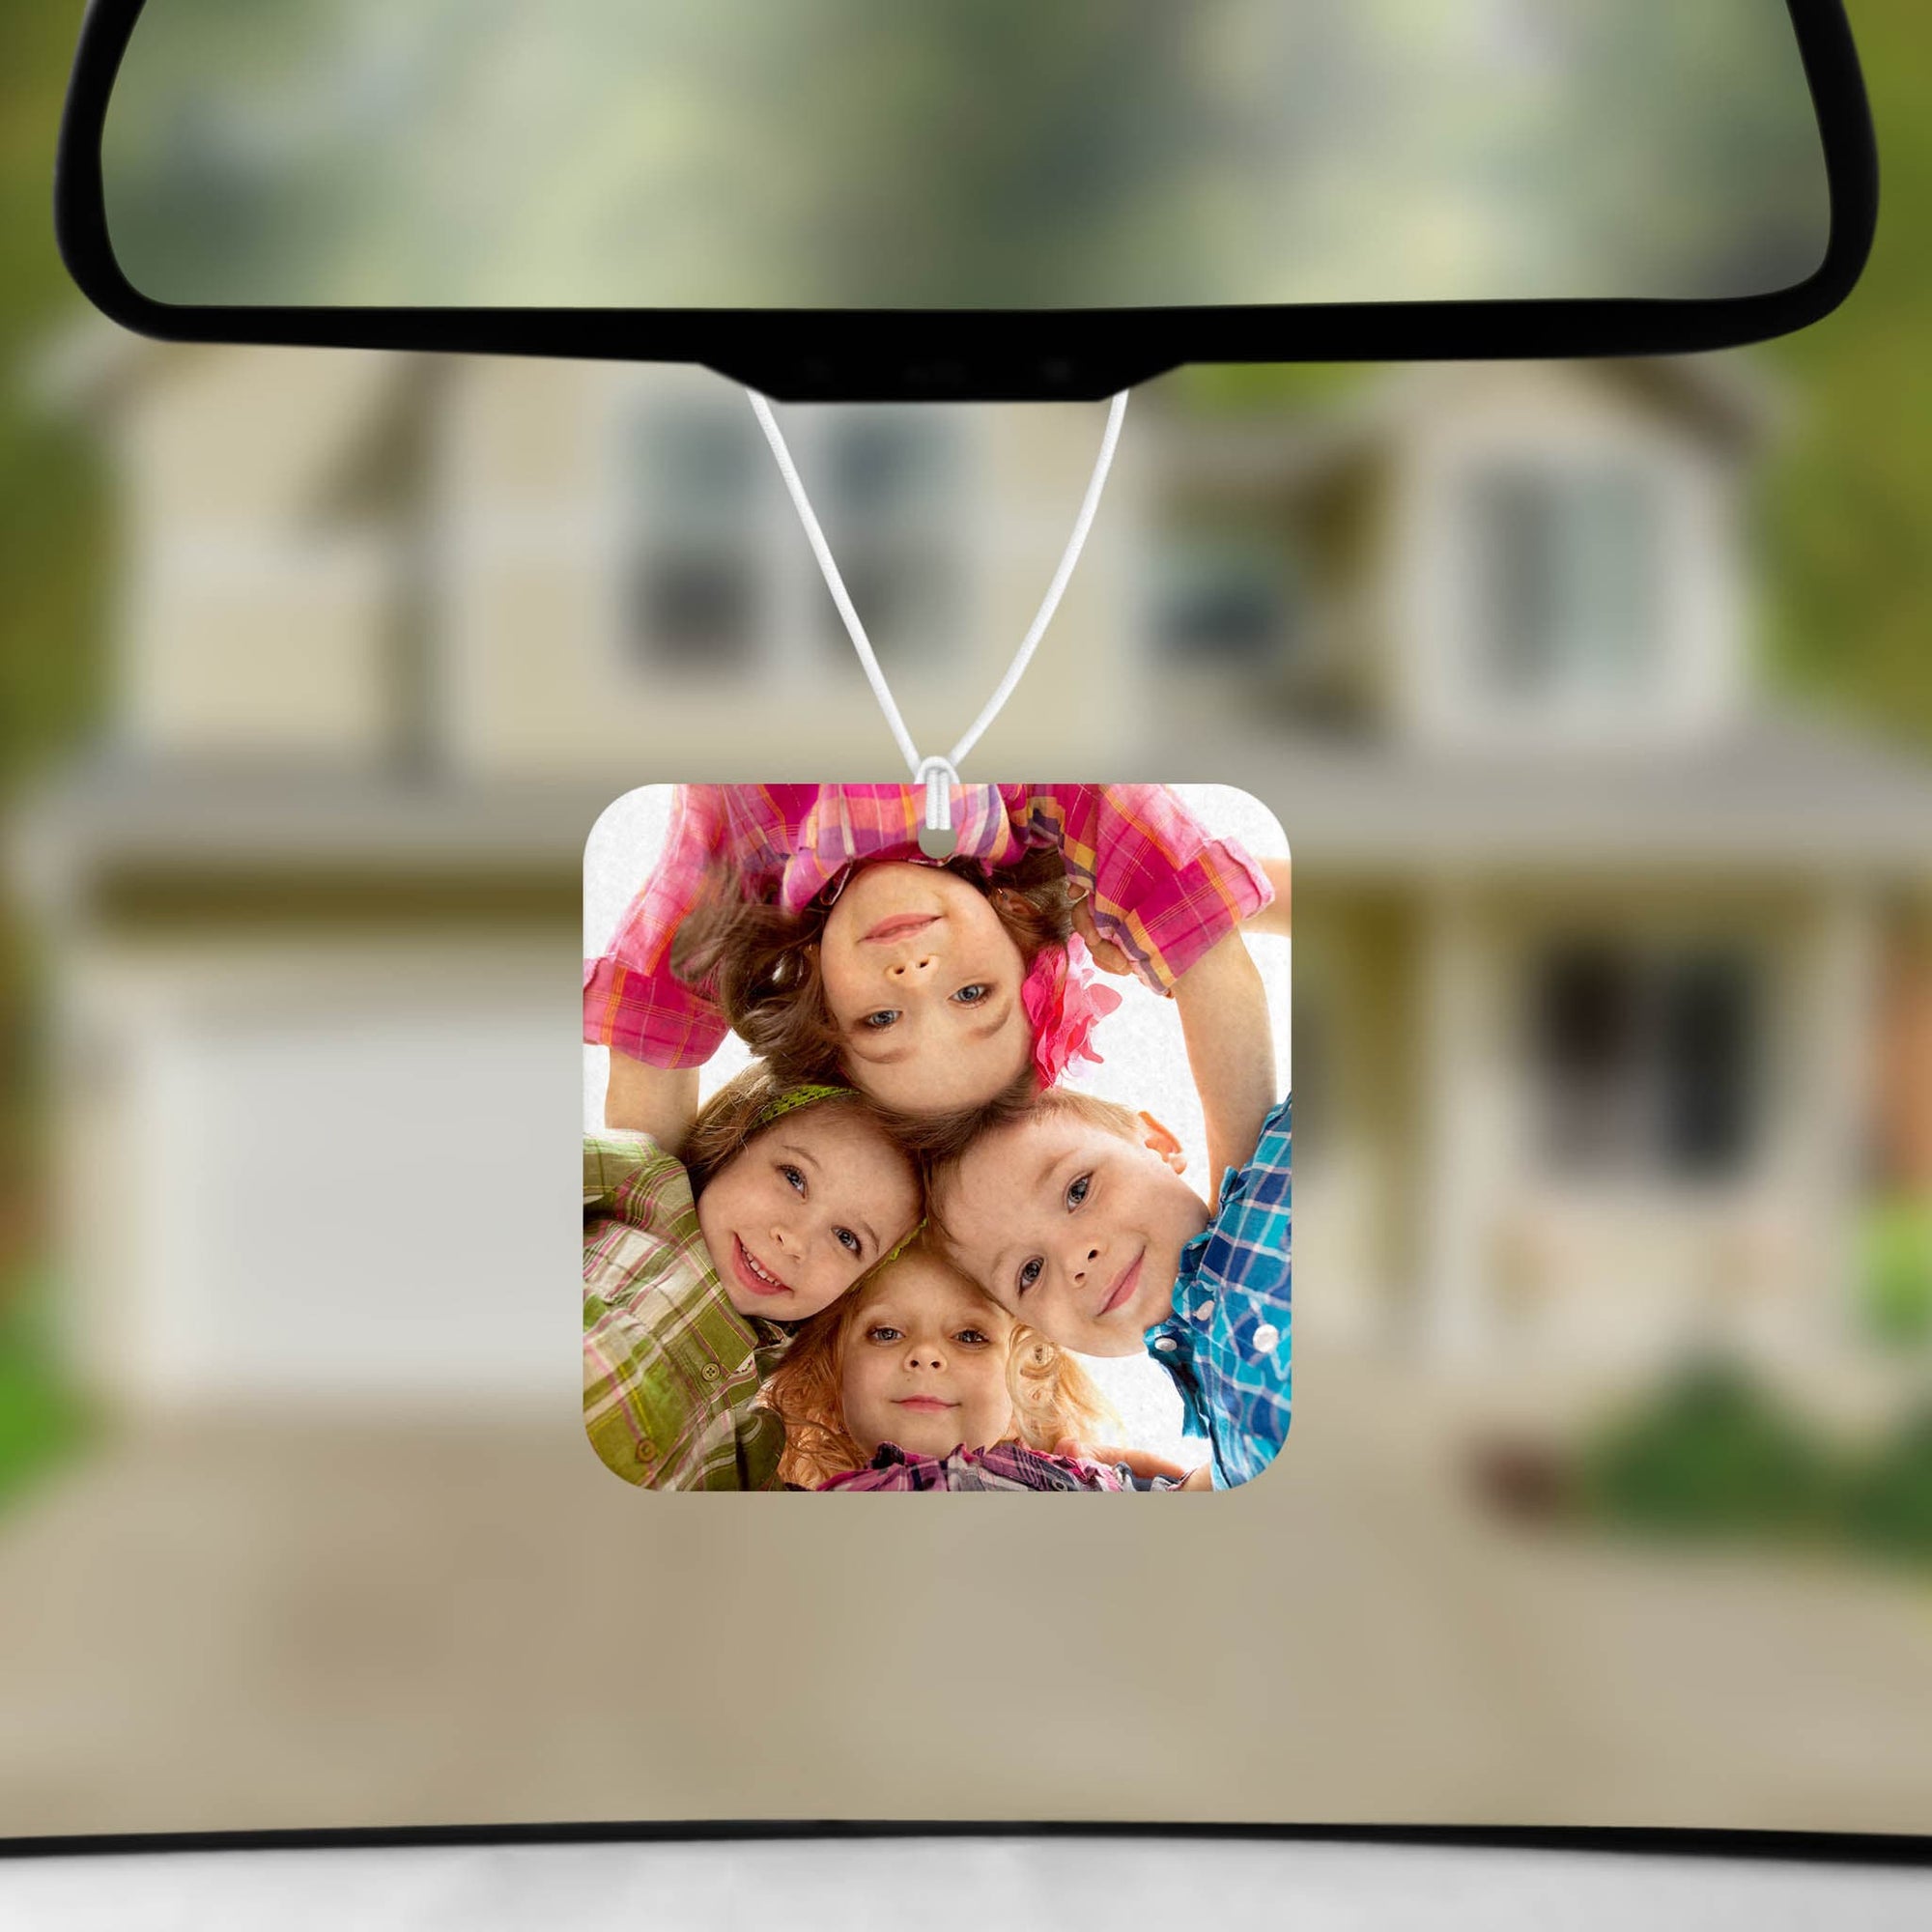 Personalized Air Fresheners | Set of 2 | Custom Car Accessories | Children Photo